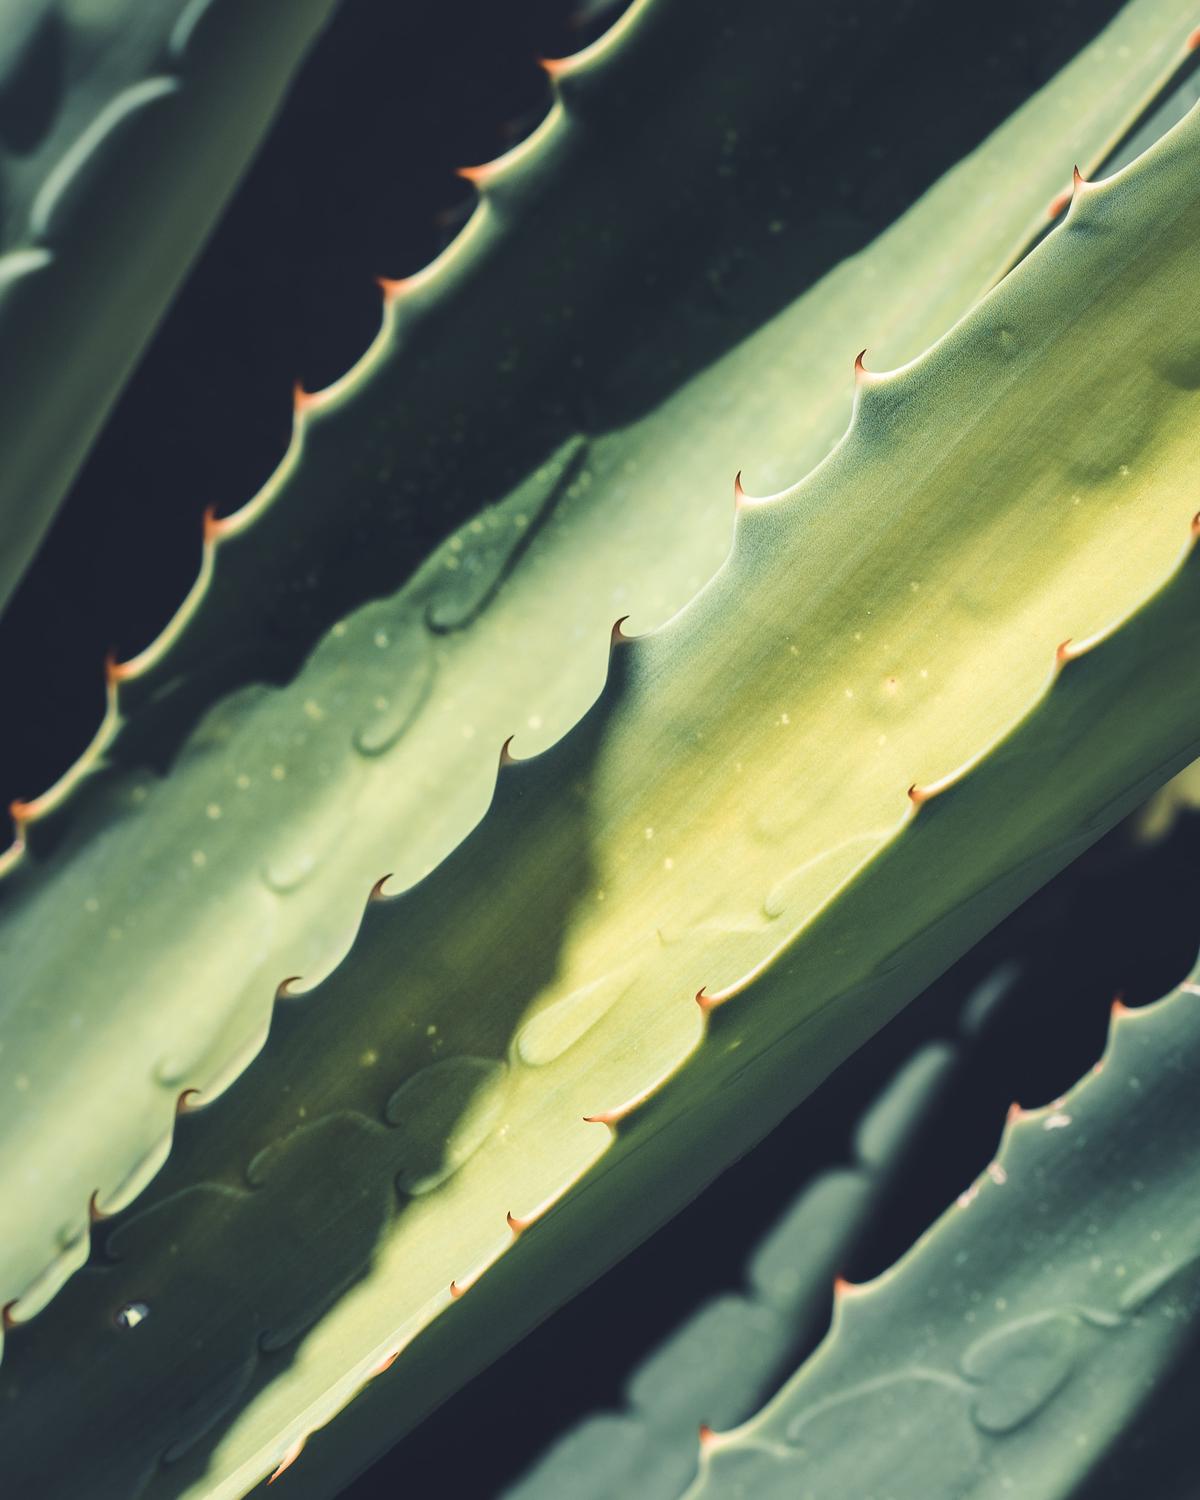 Aloe Vera plant with green, spiky leaves and a thick gel-filled center.